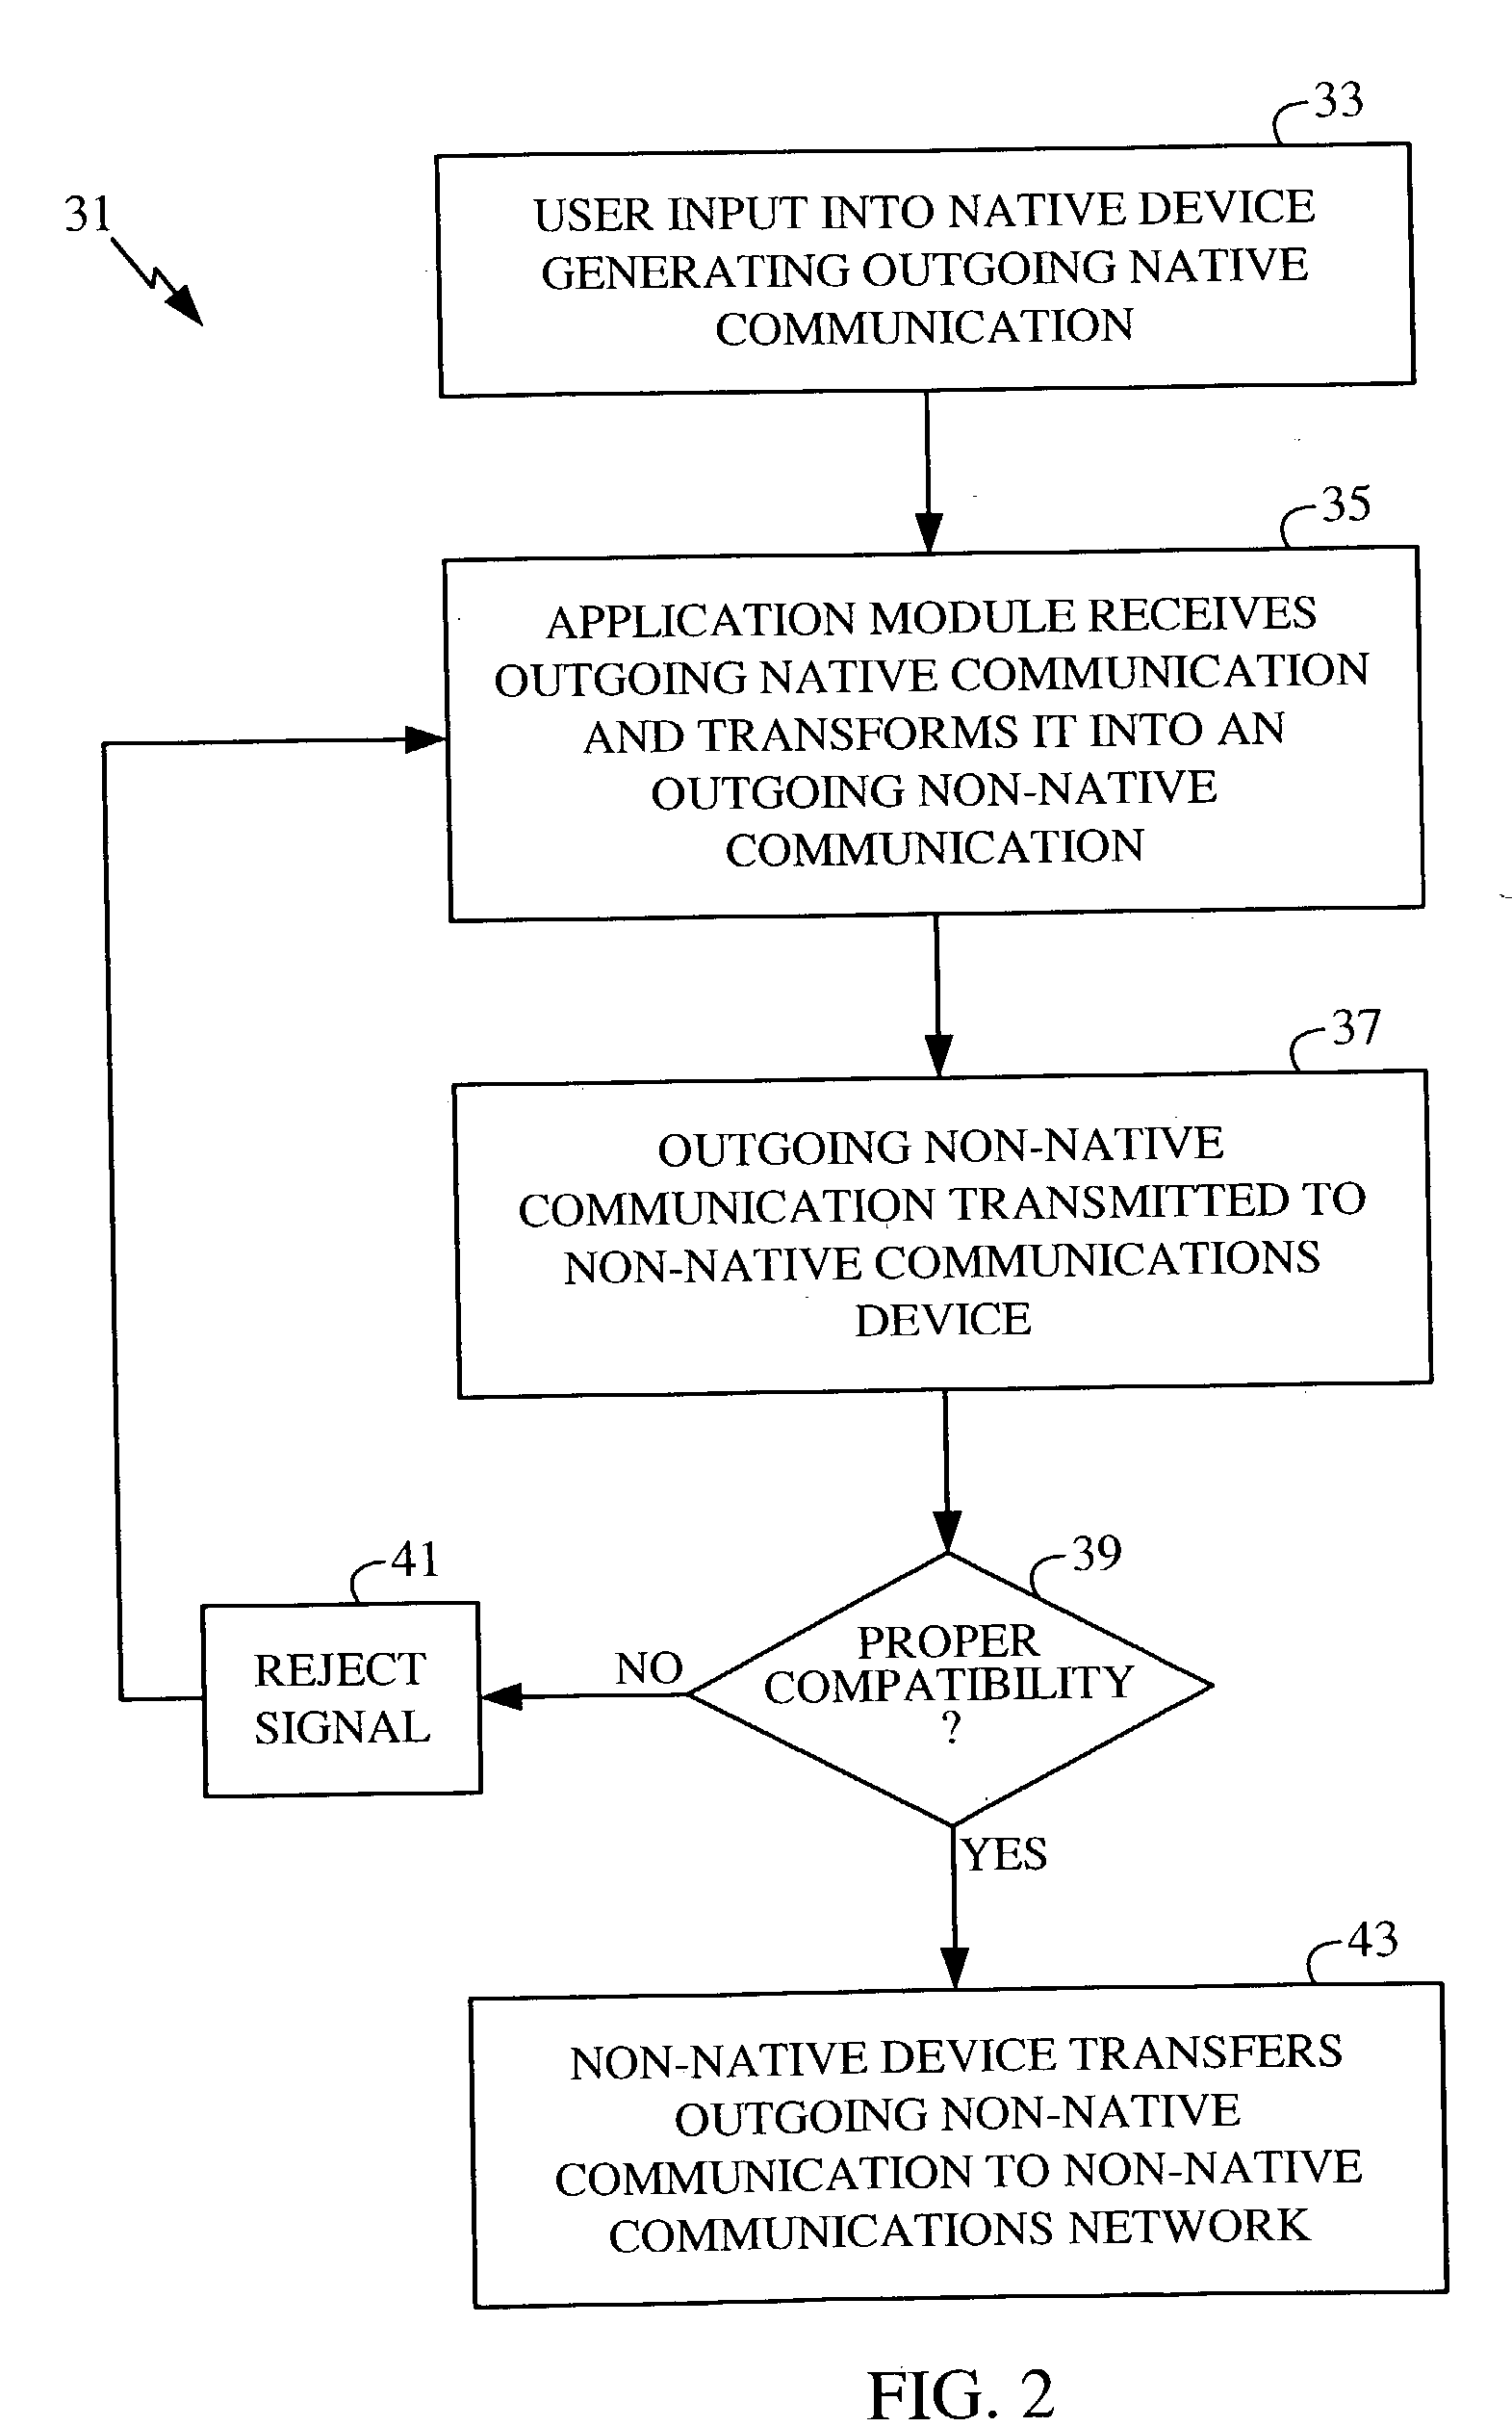 Systems and methods for utilizing an application from a native portable device within a non-native communications network